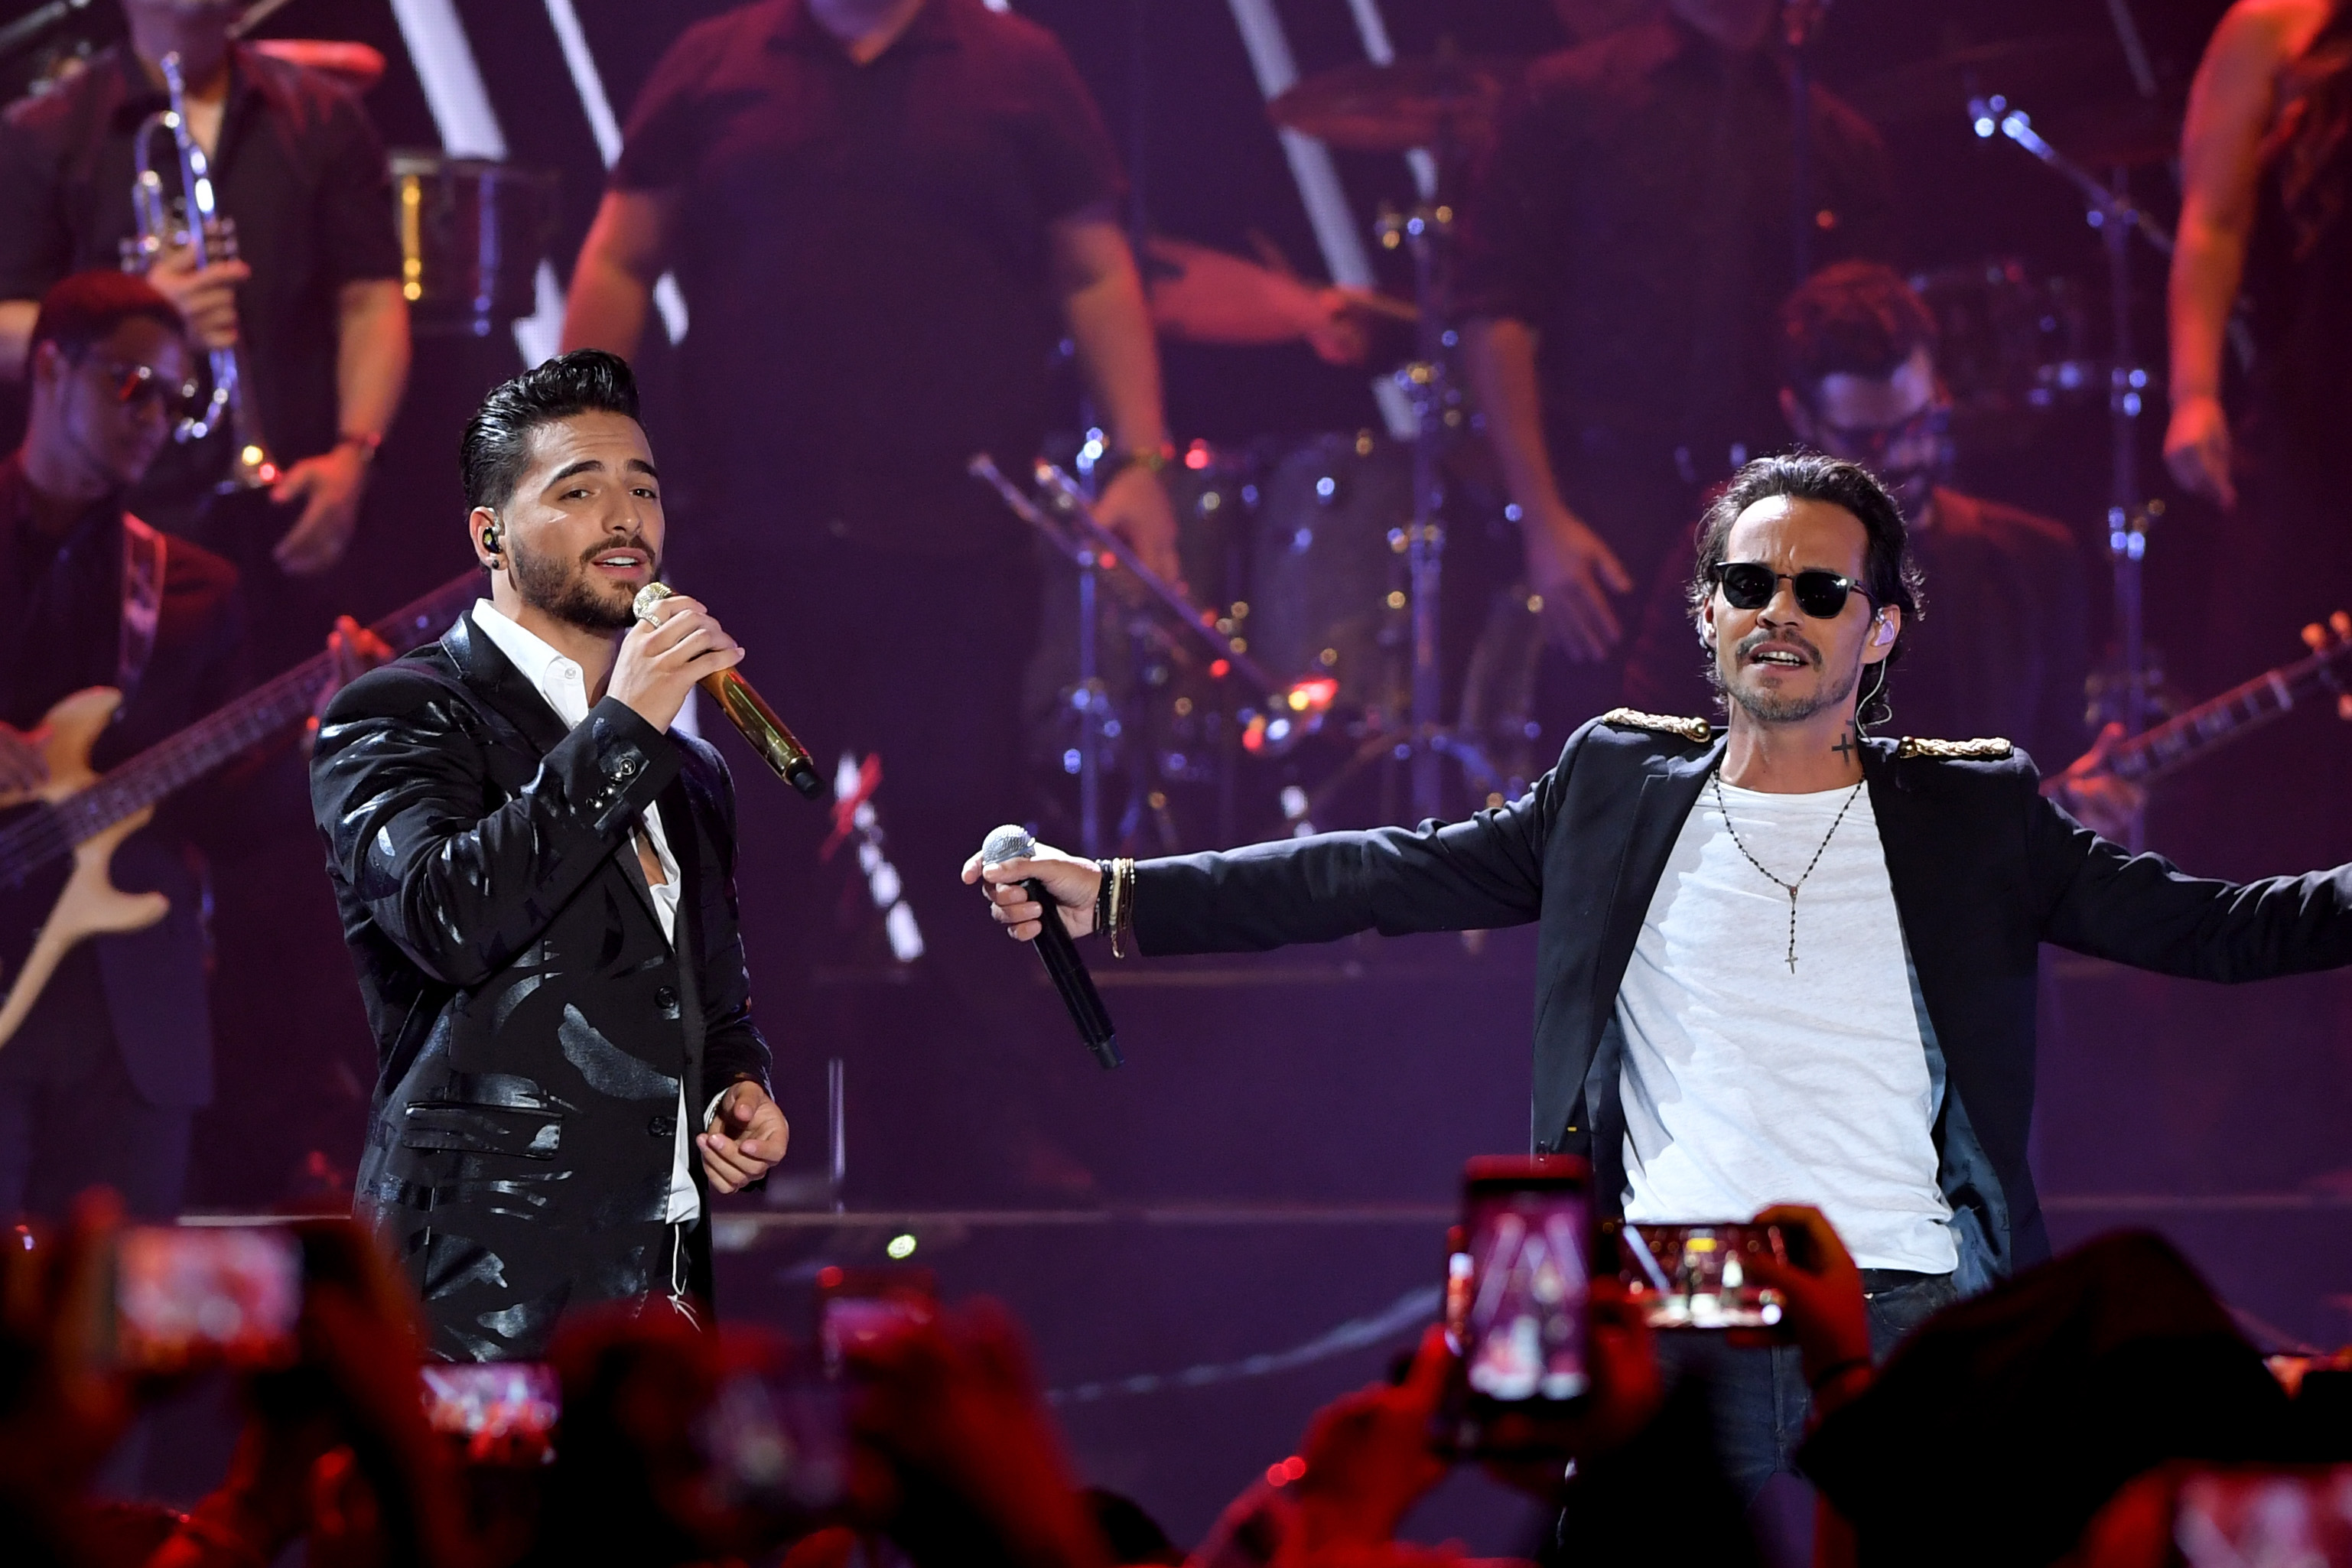 CORAL GABLES, FL - JULY 06: Maluma and Marc Anthony perform on stage during Univision's "Premios Juventud" 2017 Celebrates The Hottest Musical Artists And Young Latinos Change-Makers at Watsco Center on July 6, 2017 in Coral Gables, Florida.   Rodrigo Varela/Getty Images for Univision/AFP